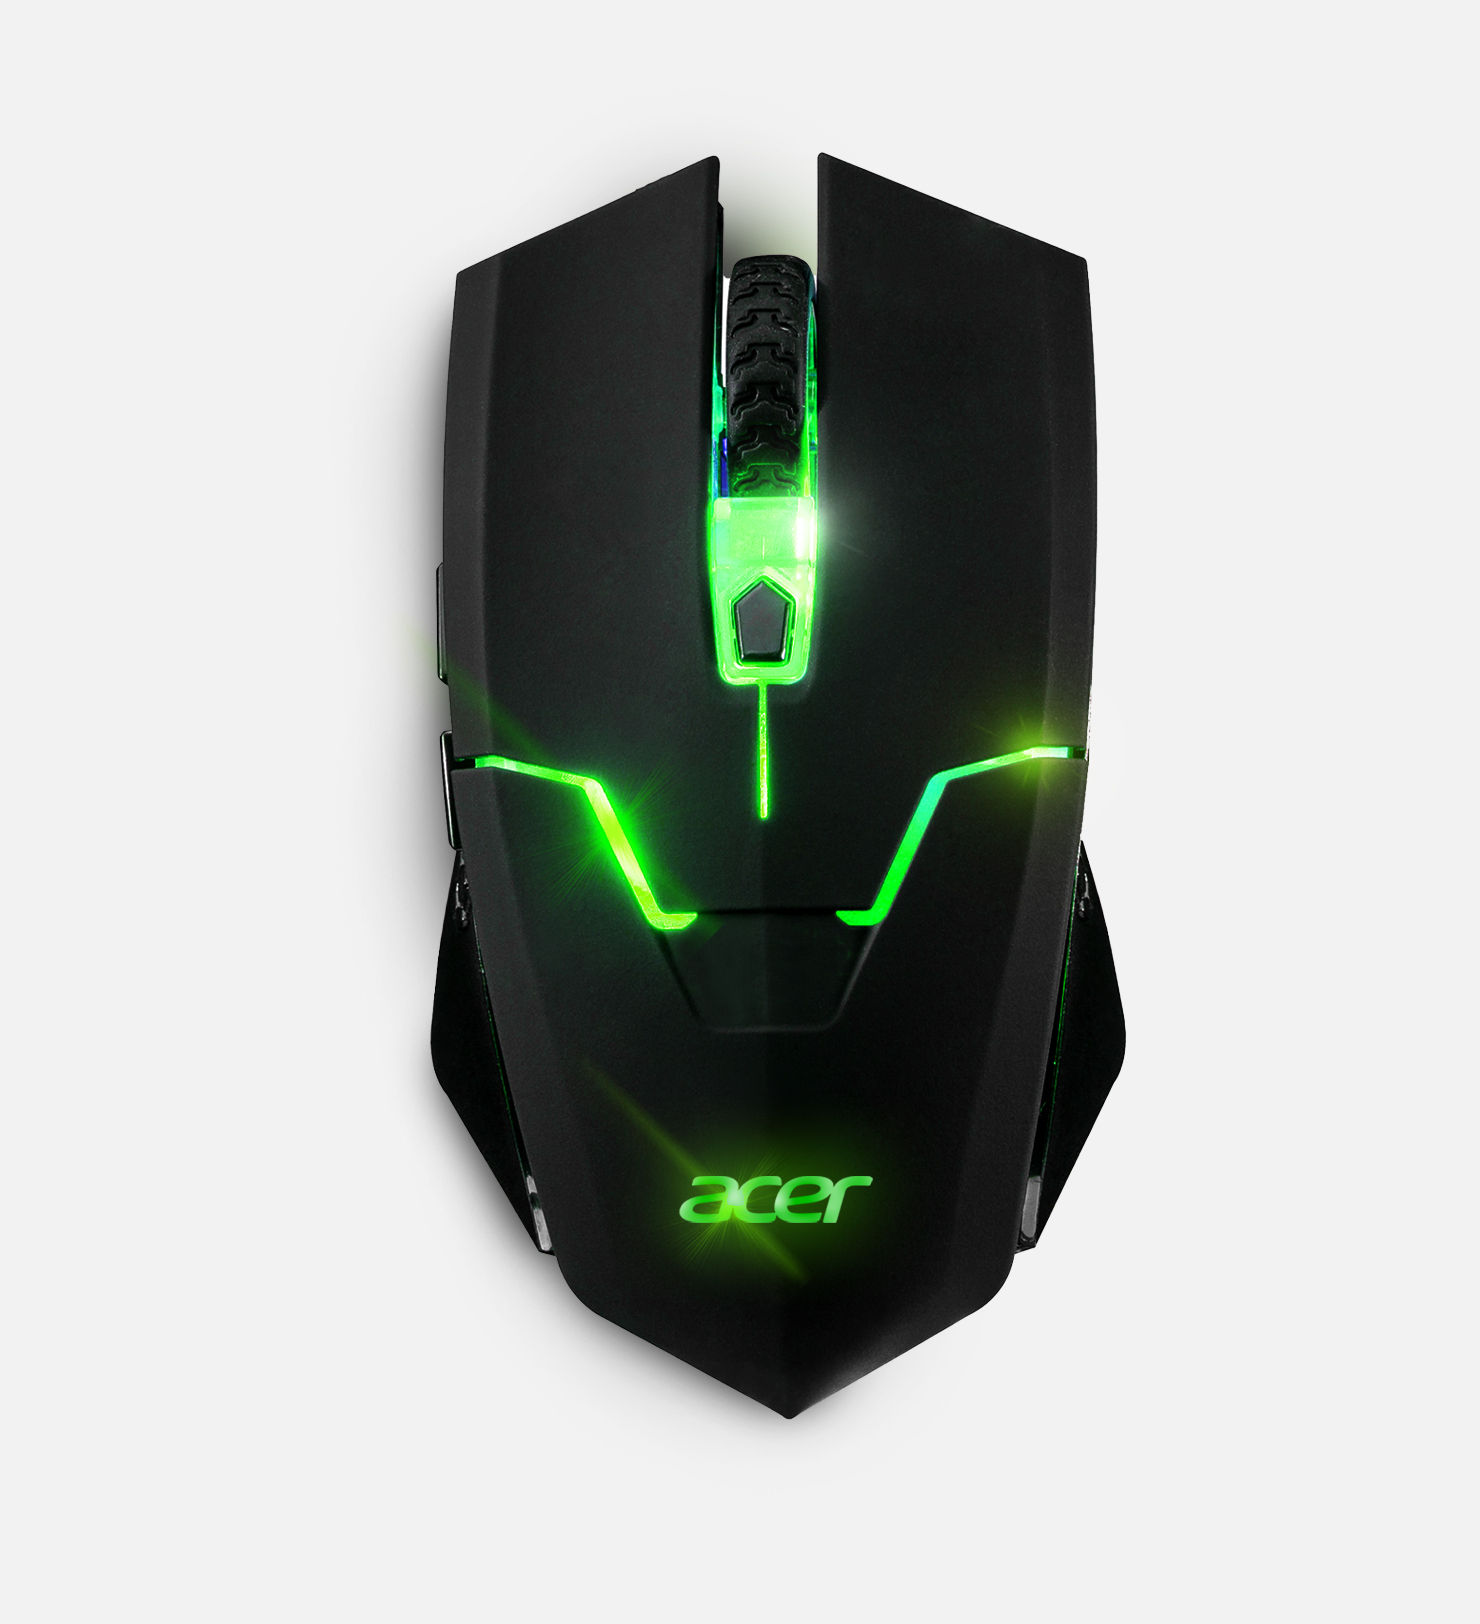 ACER Stark-gm1200 MOUSE GAMING